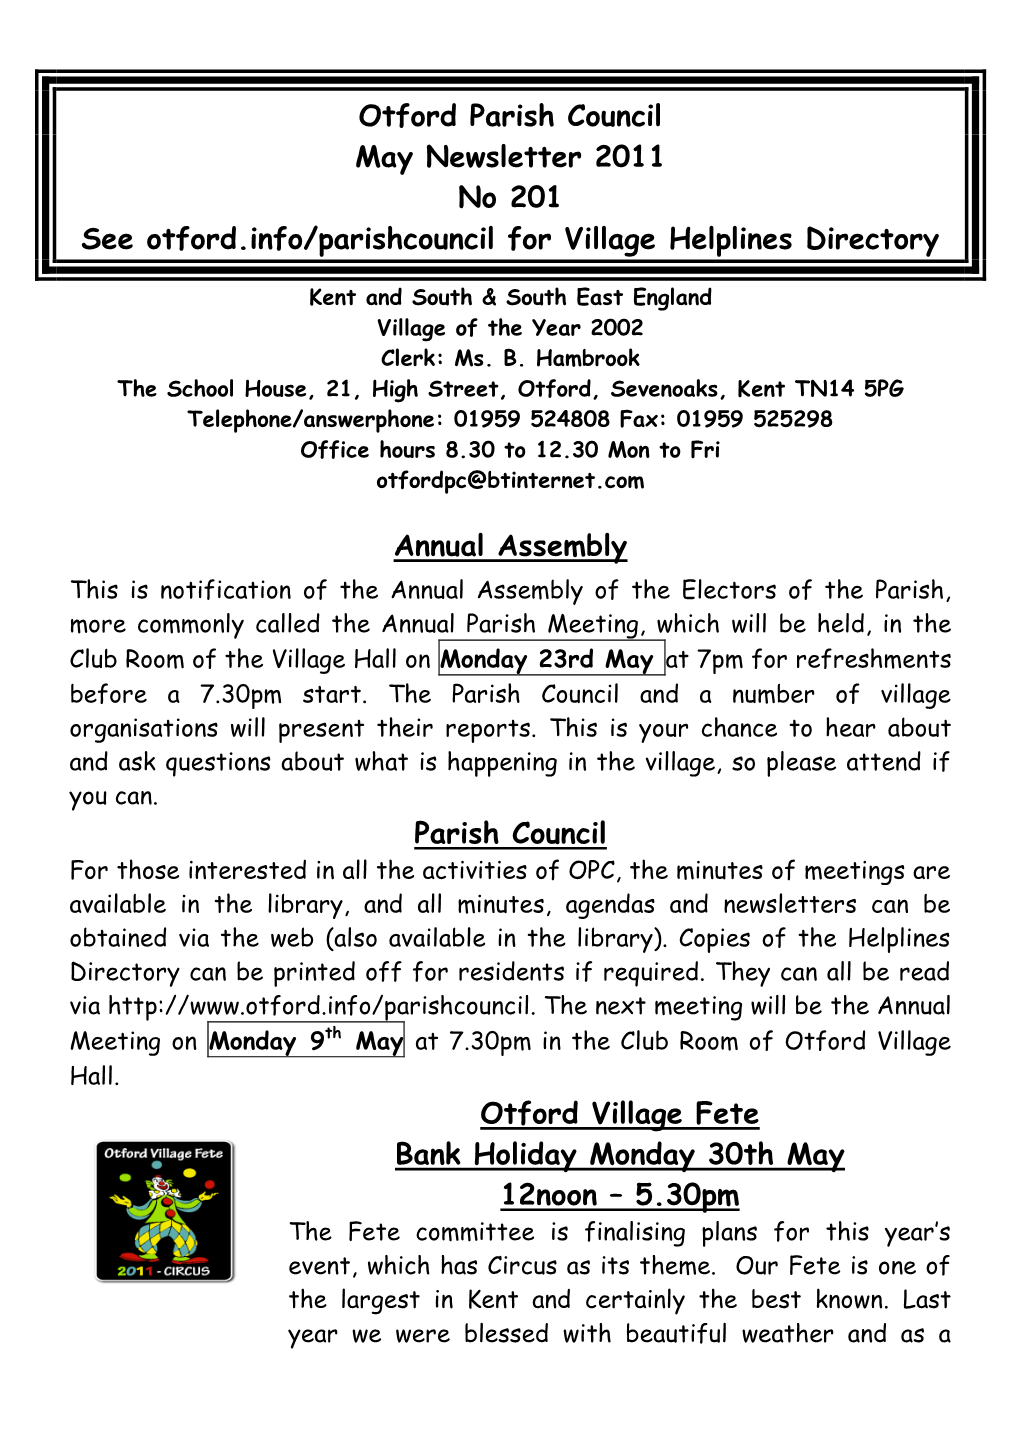 Otford Parish Council May Newsletter 2011 No 201 See Otford.Info/Parishcouncil for Village Helplines Directory